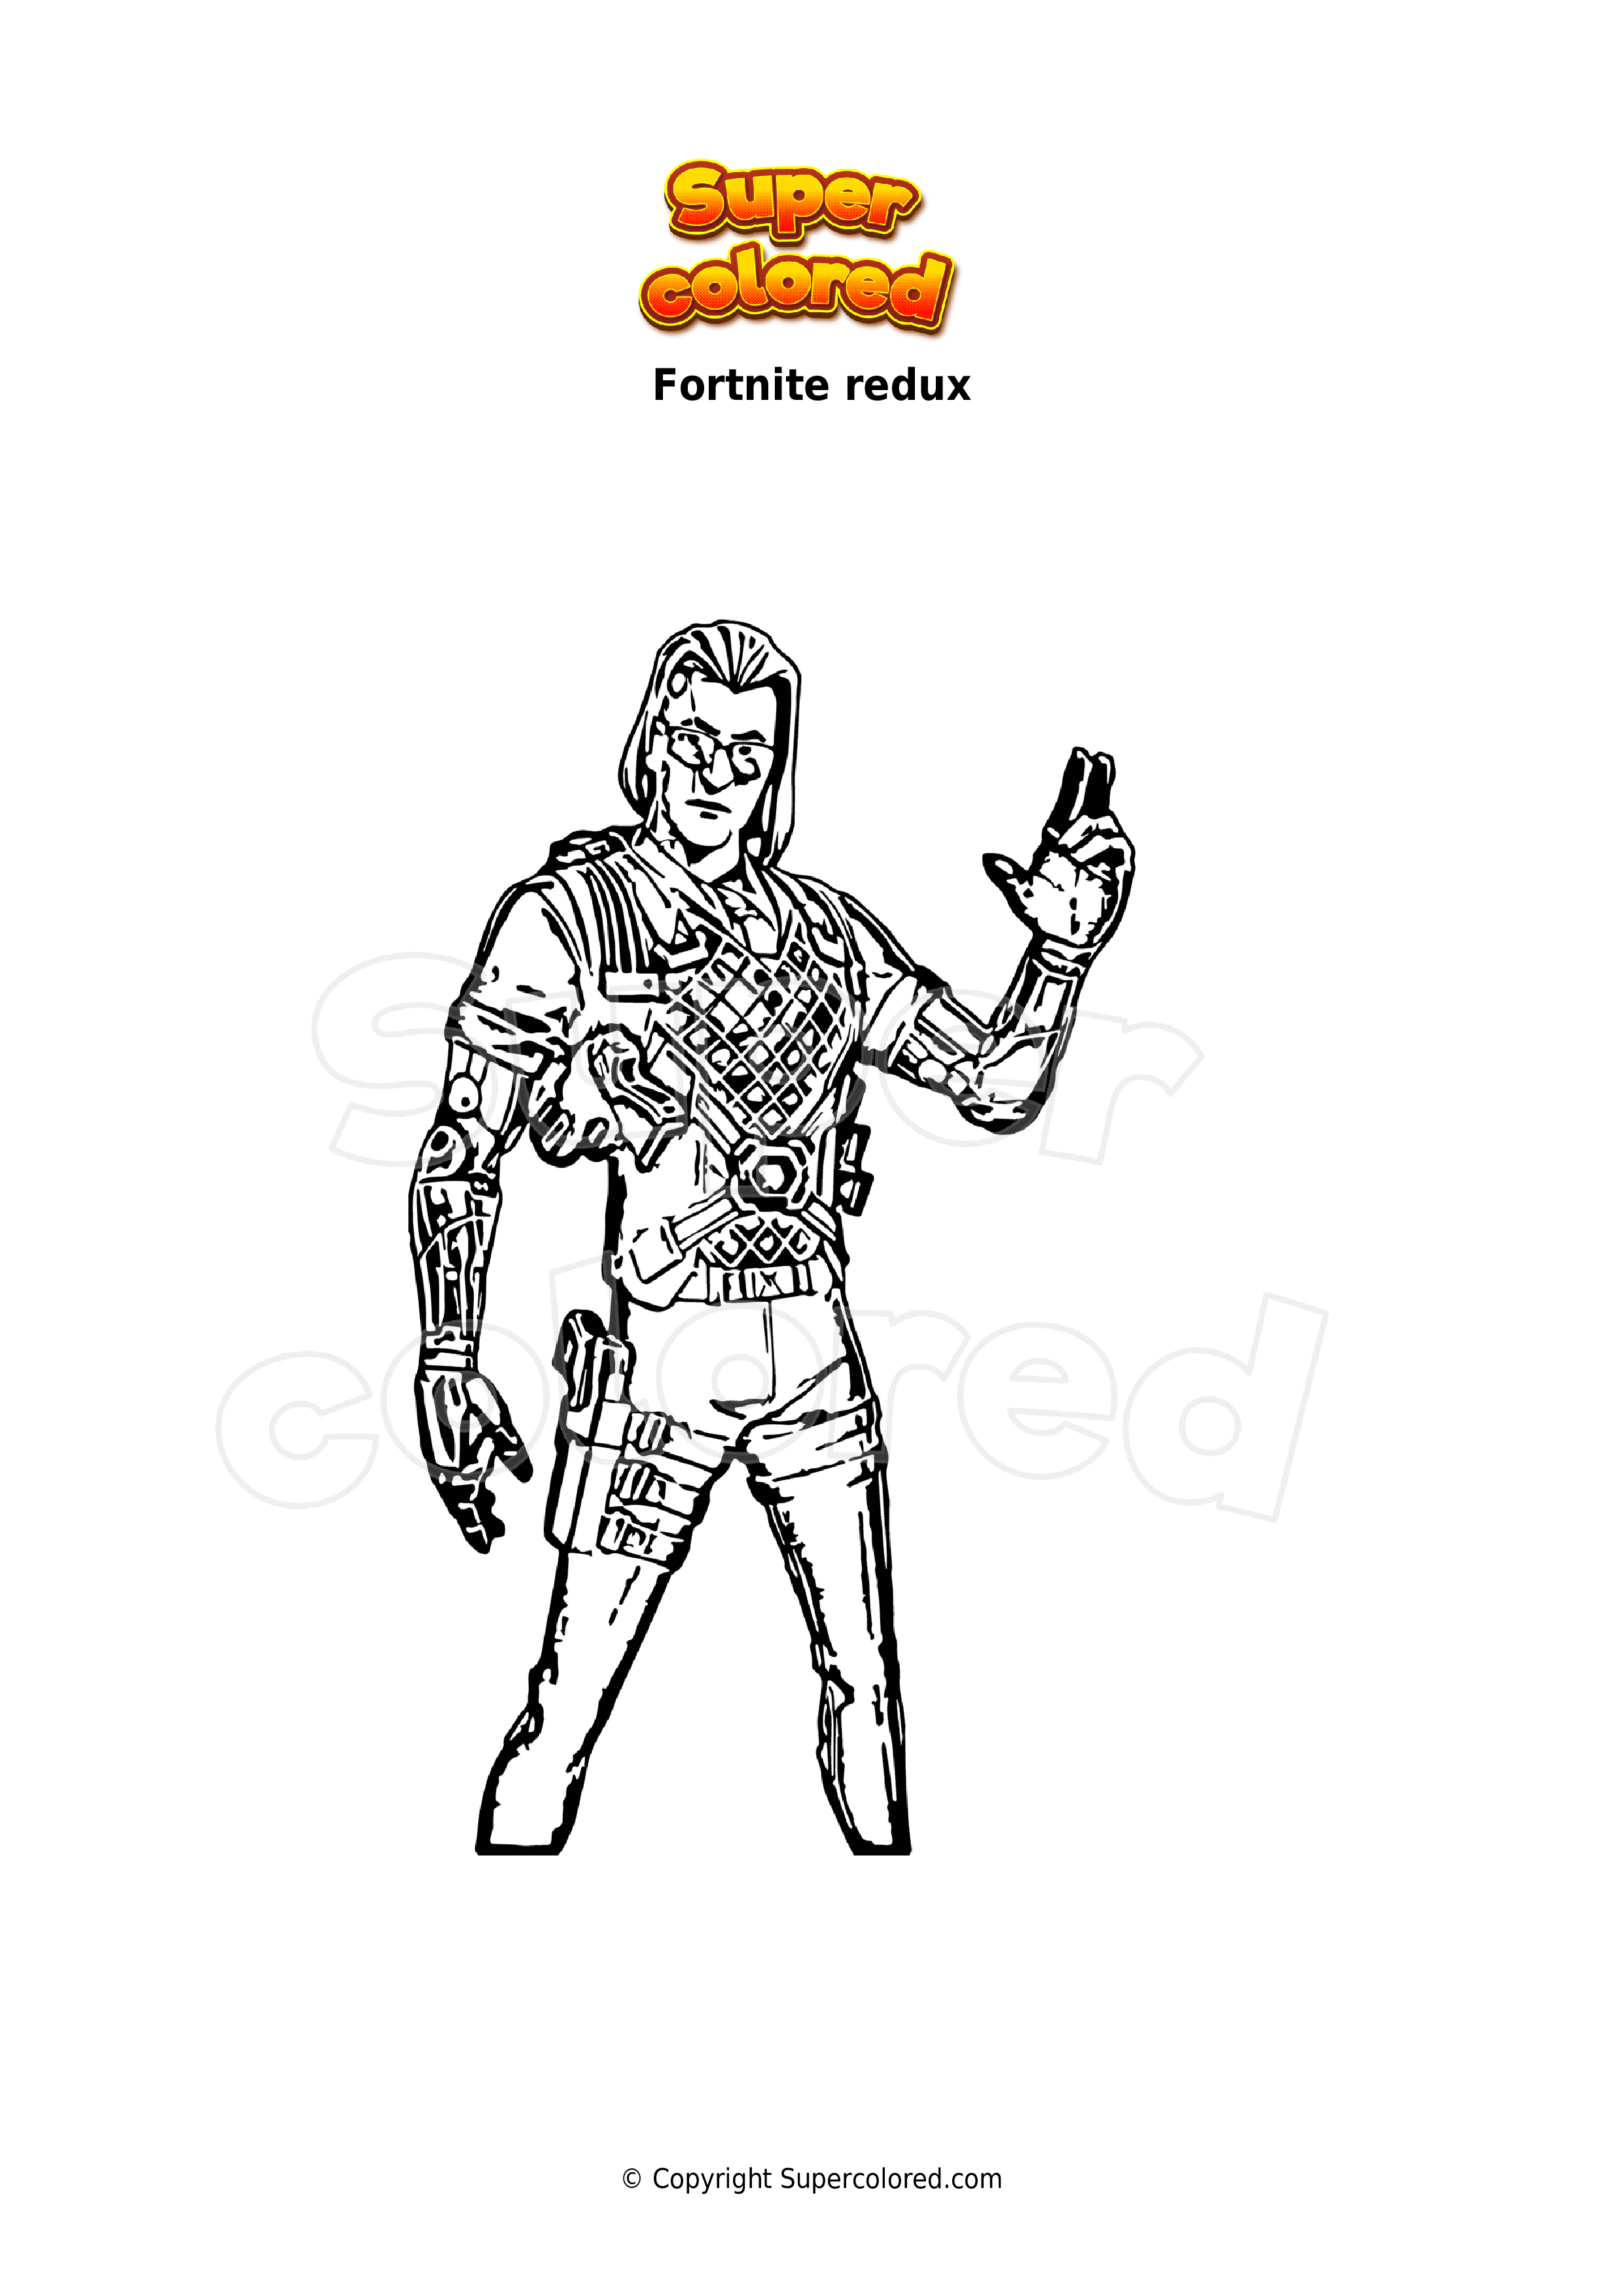 coloring-page-fortnite-the-foundation-supercolored